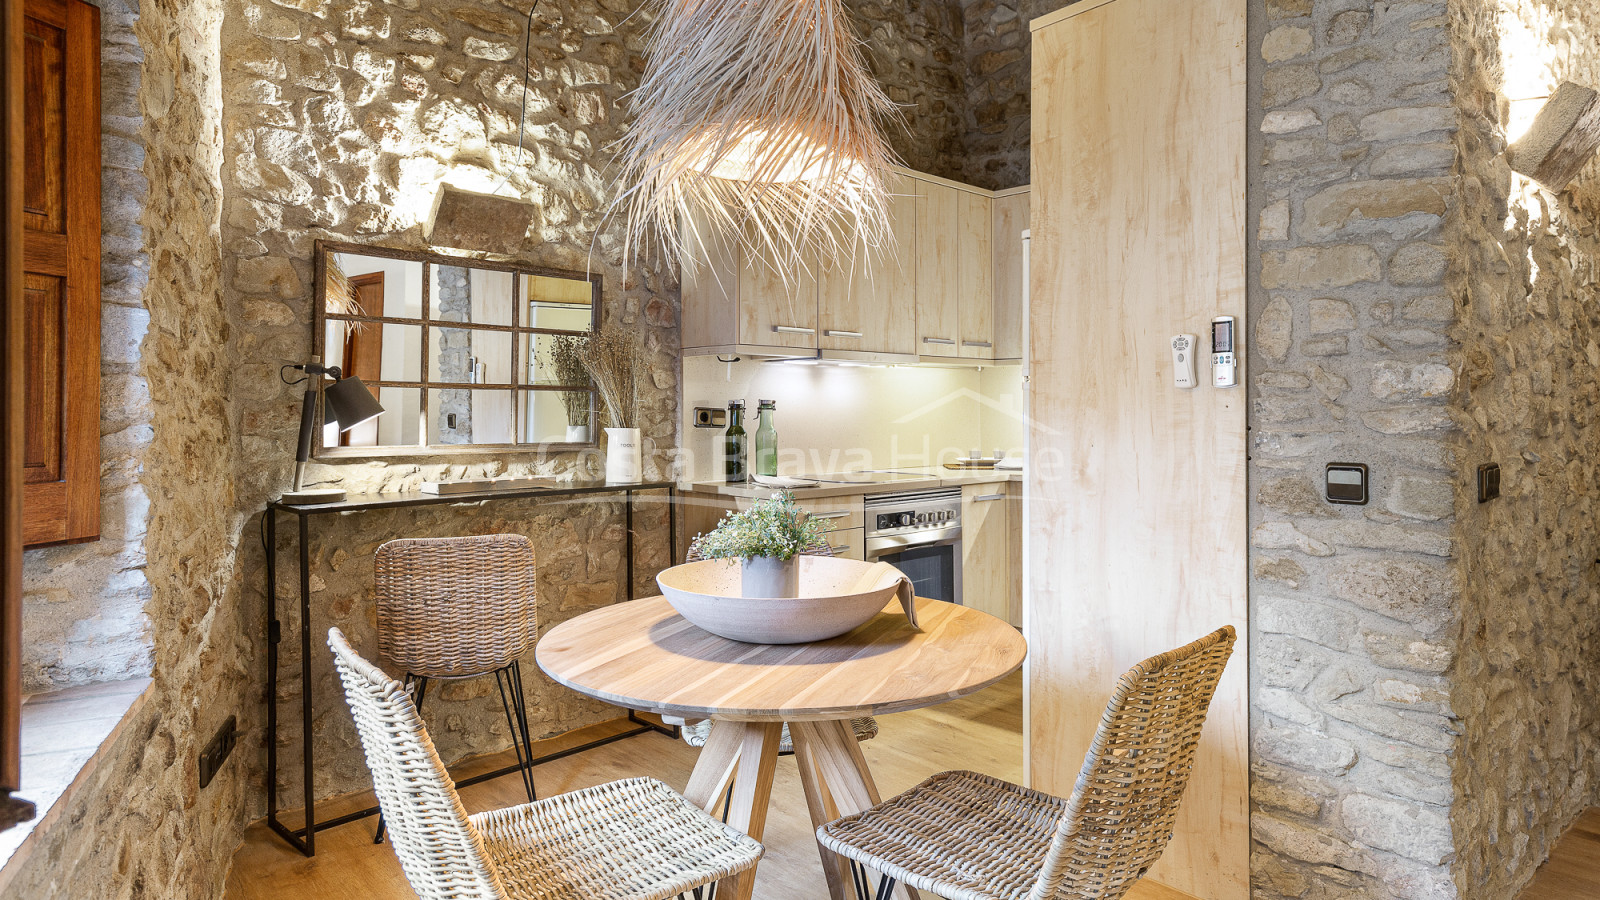 Old stone barn tuned into a charming rustic home in Jafre, Baix Empordà